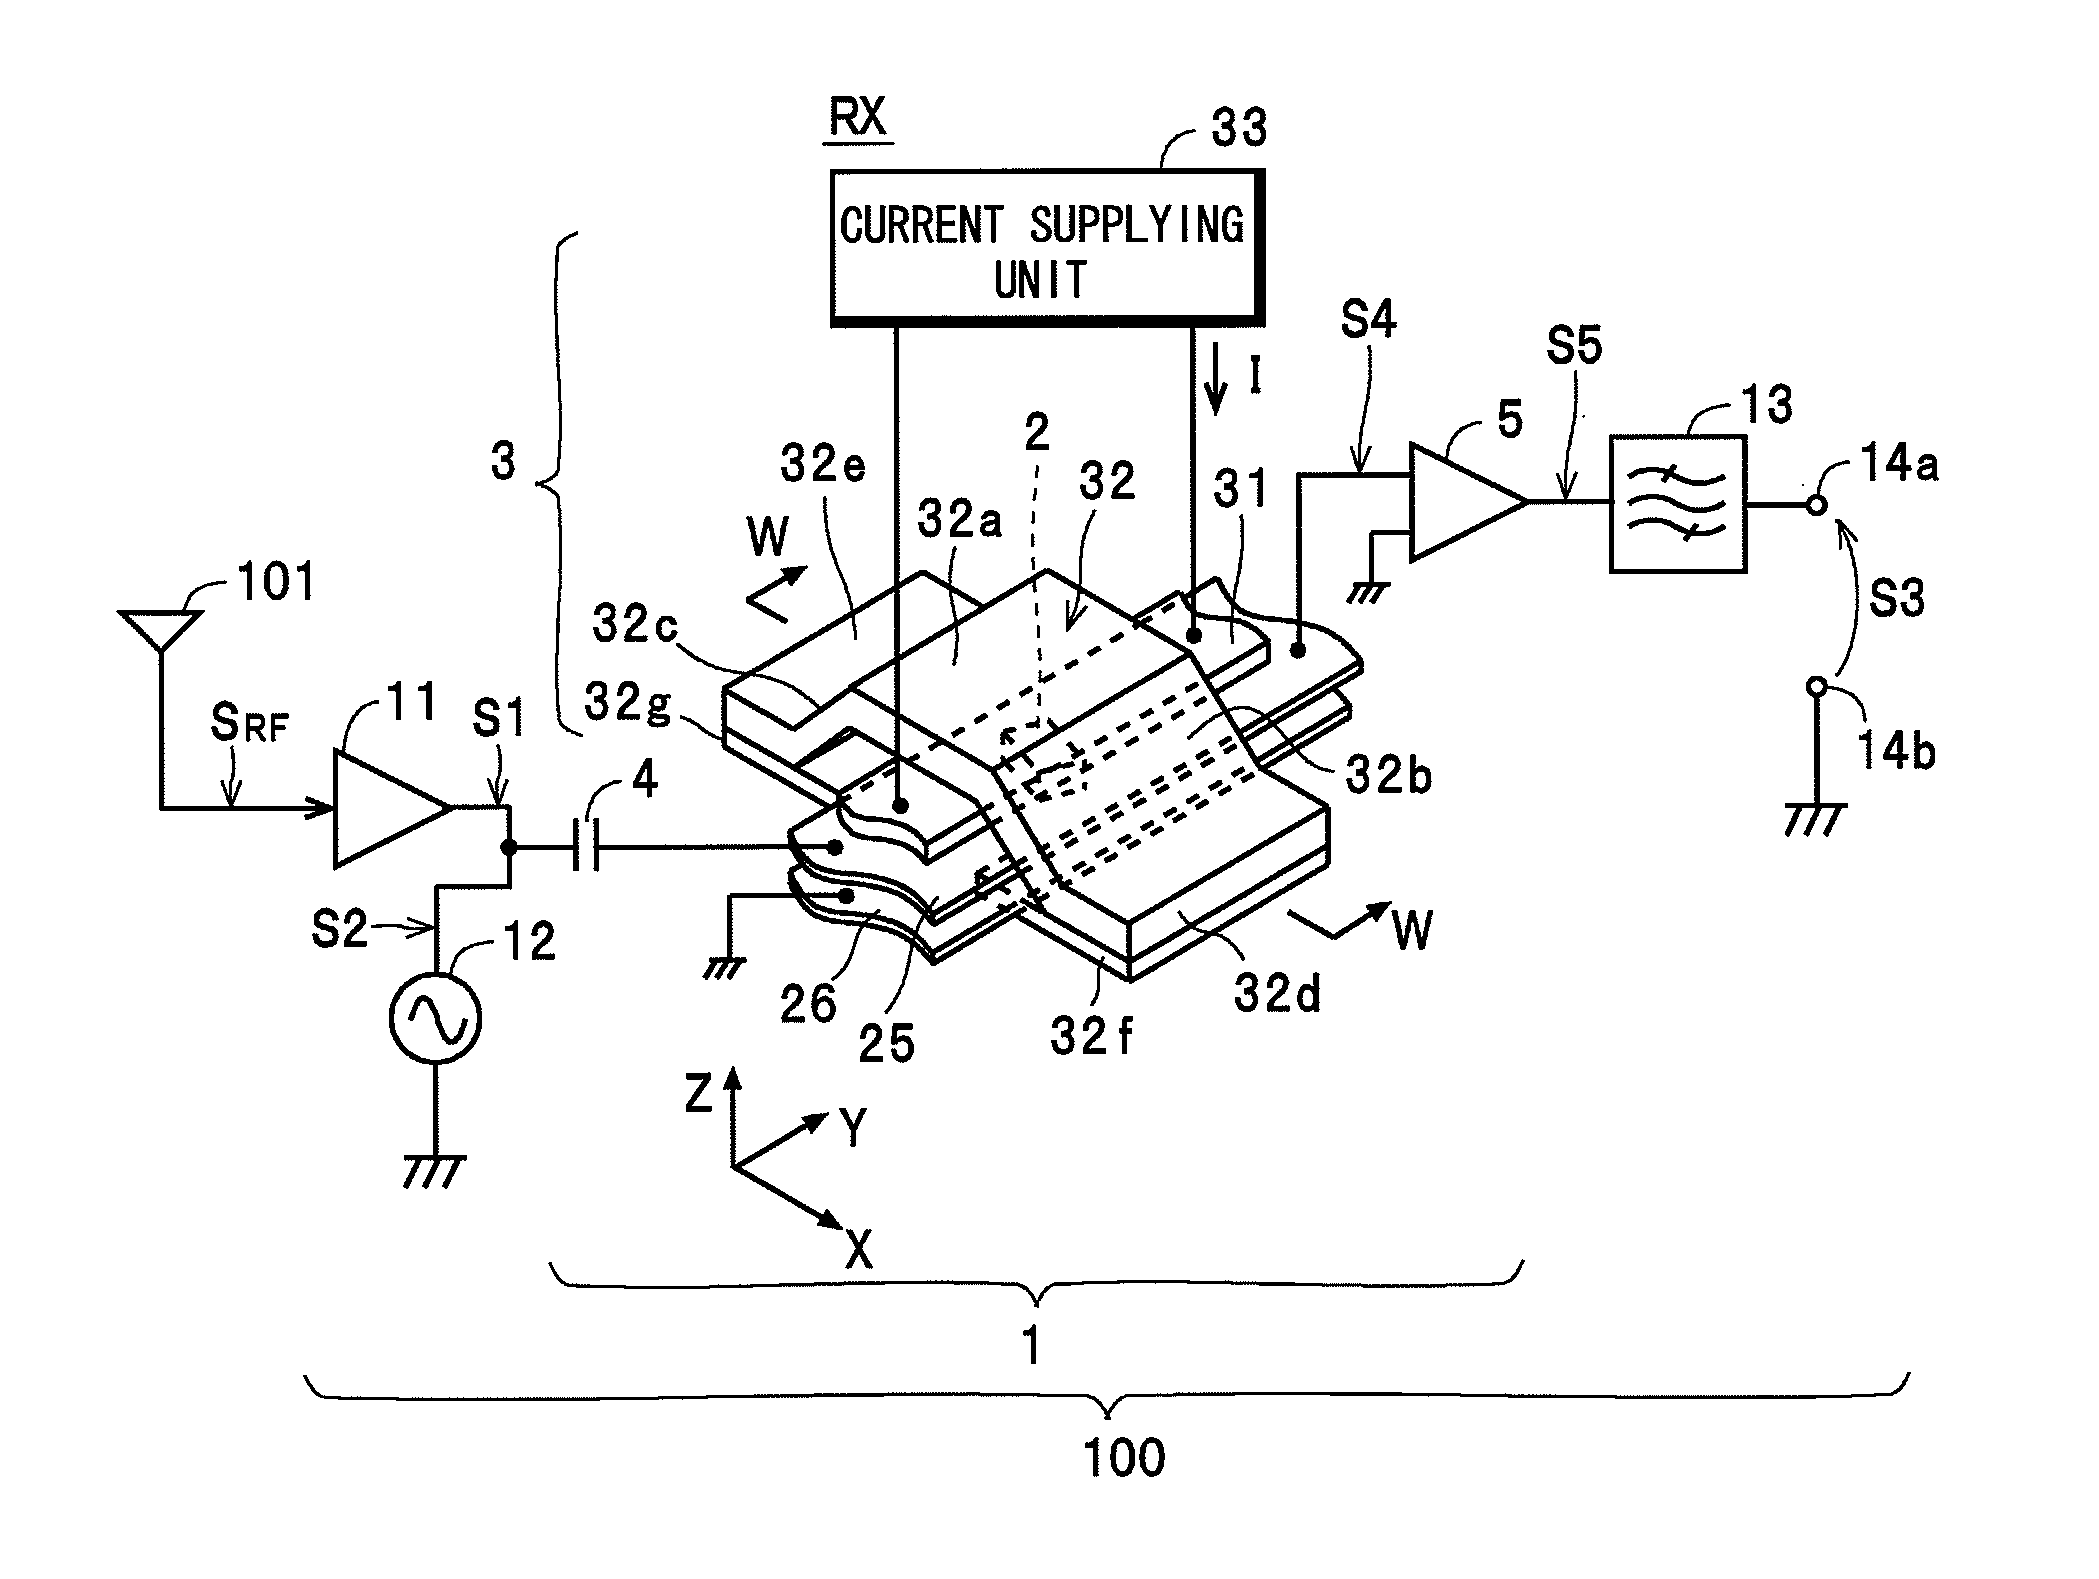 Mixer and frequency converting apparatus